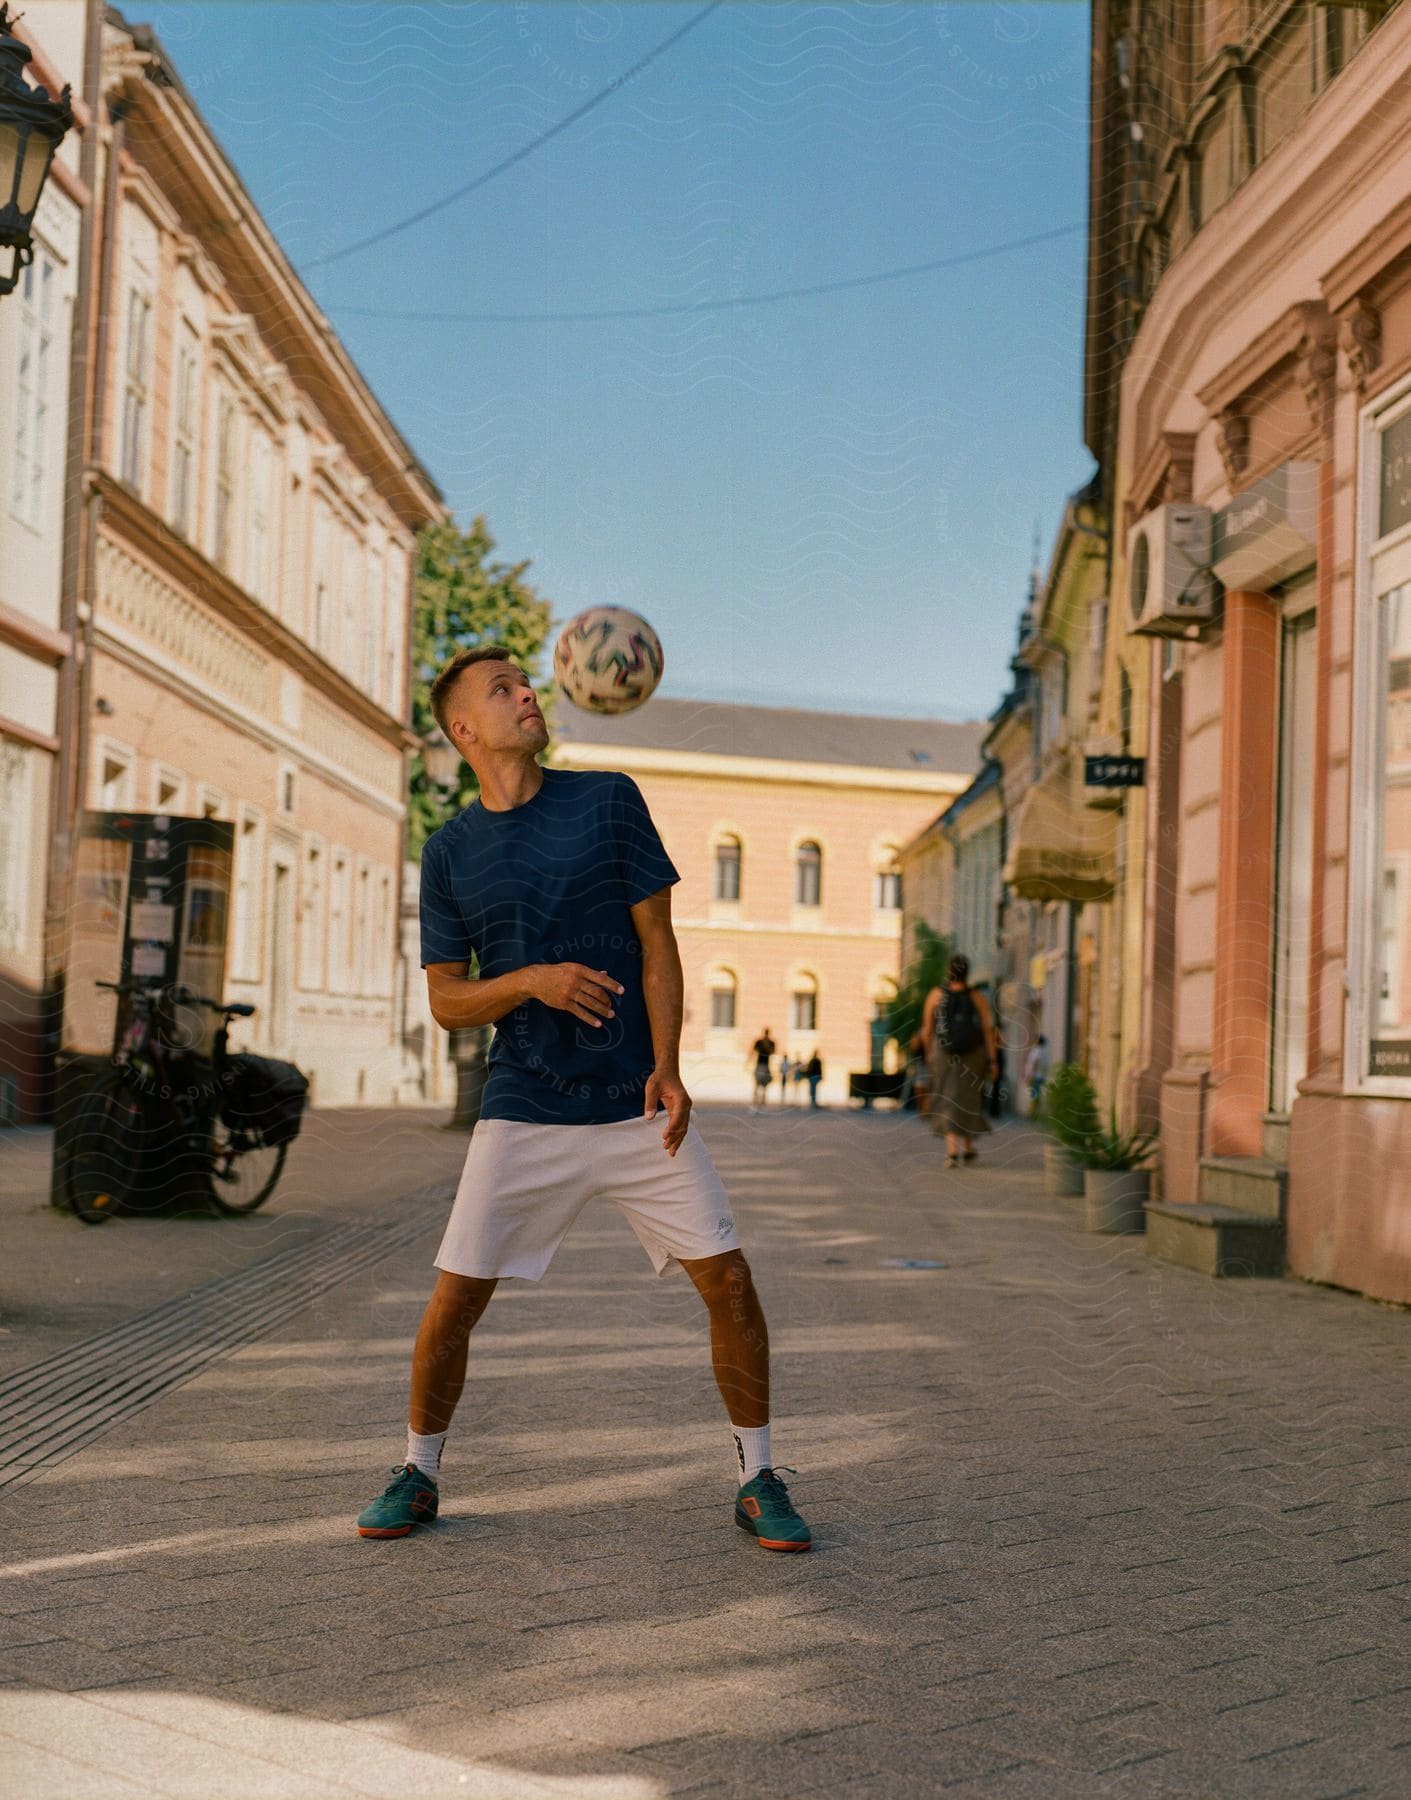 A young man playing with a soccer ball in the middle of a street.